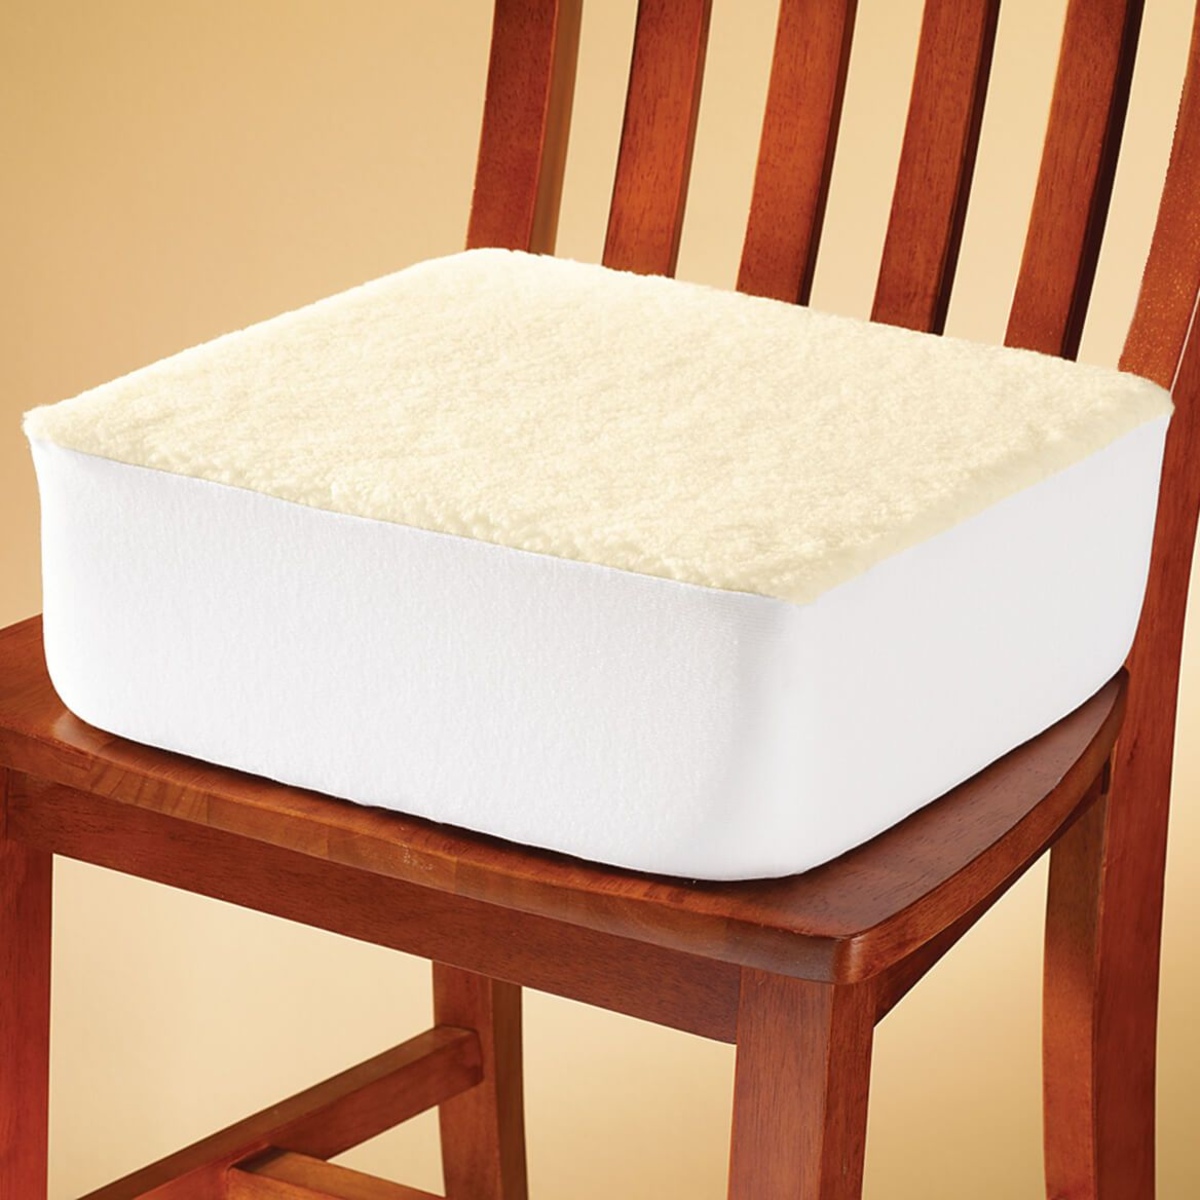 How To Choose The Right Thickness Of Foam For Dining Chairs